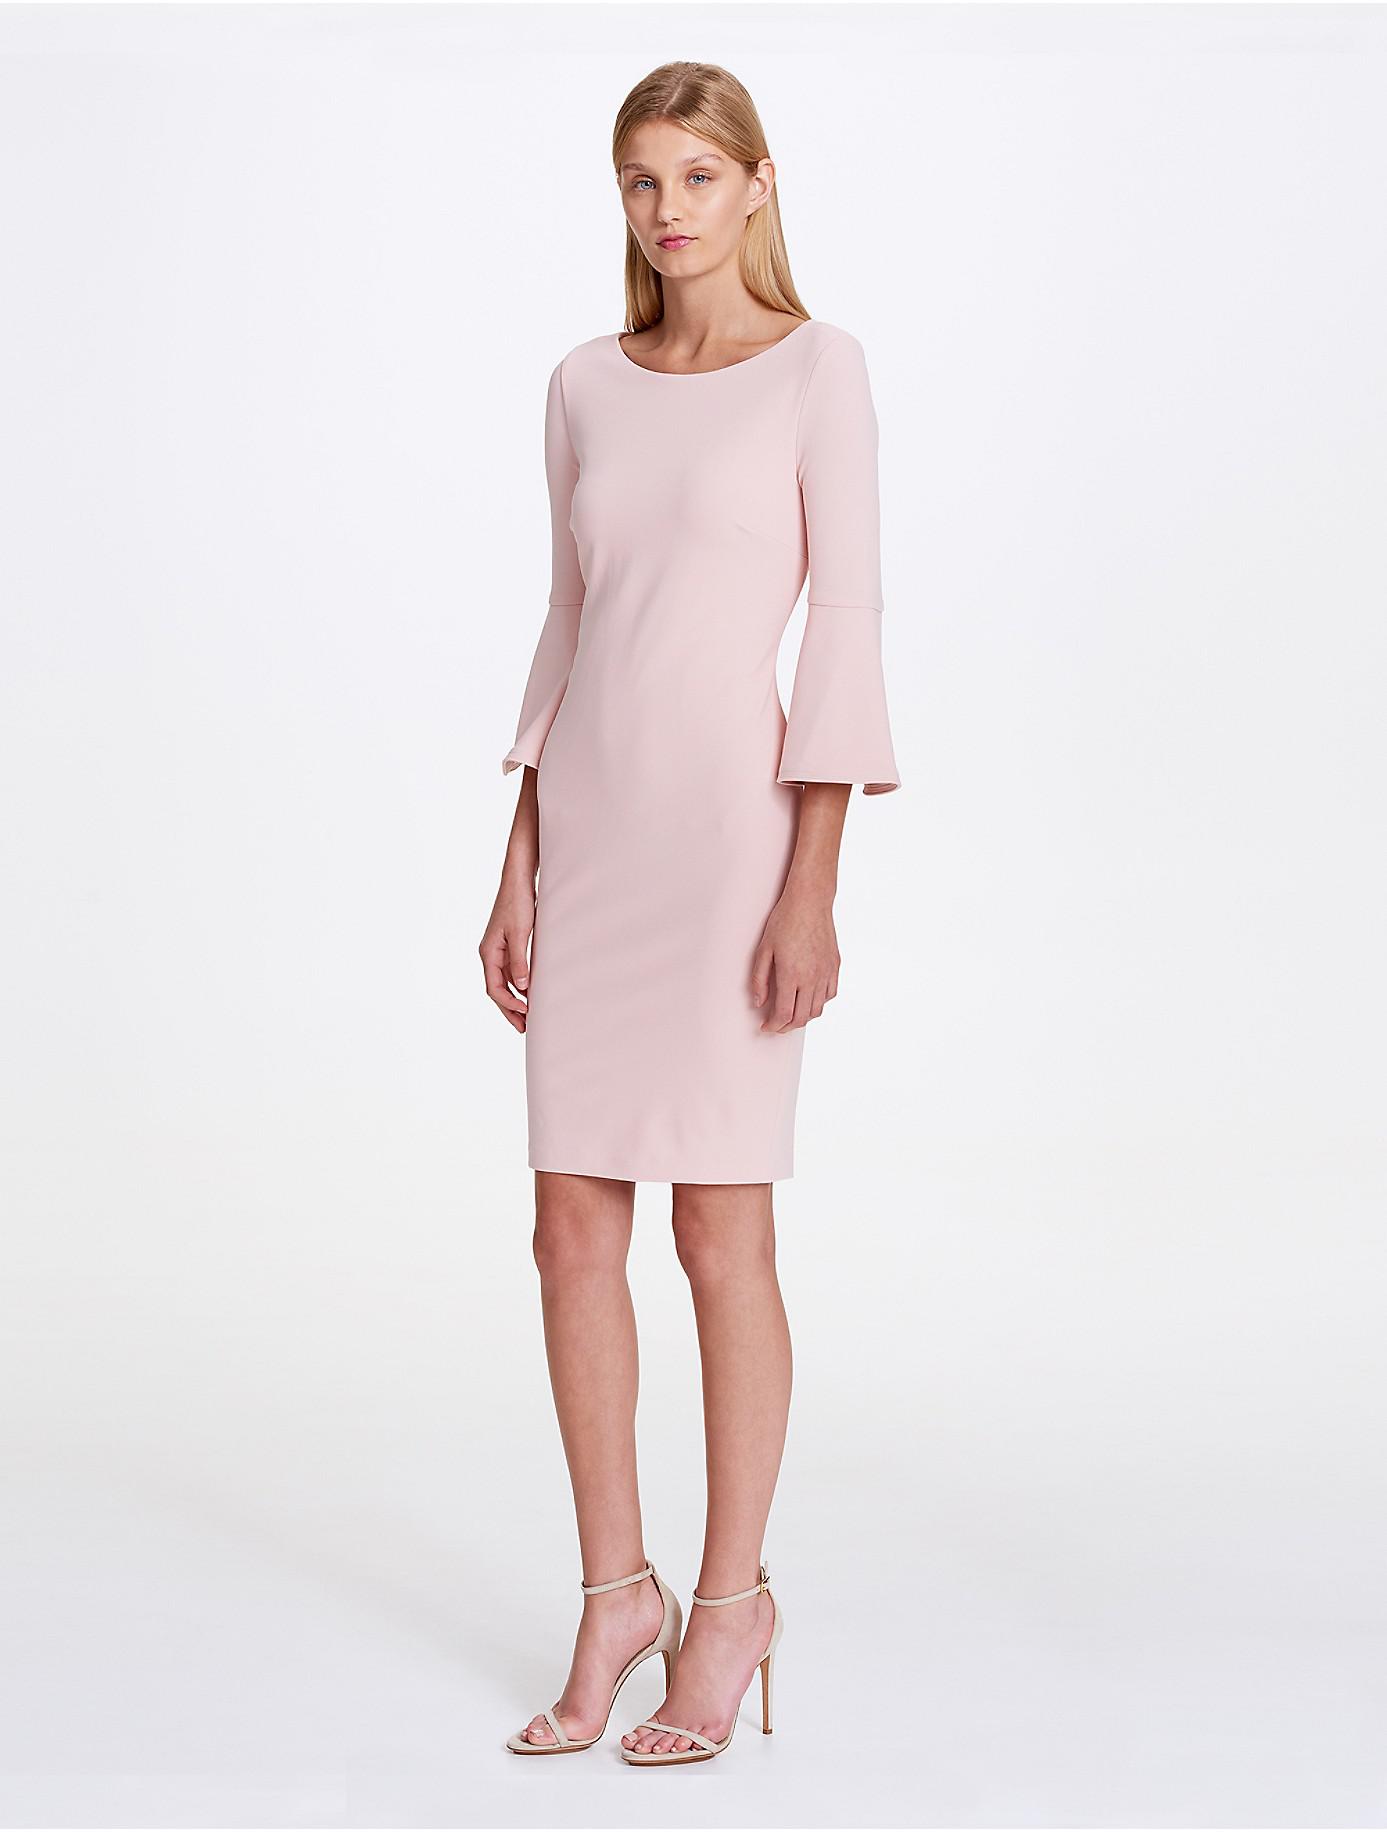 CALVIN KLEIN 205W39NYC Bell Sleeve Crepe Dress in Pink | Lyst